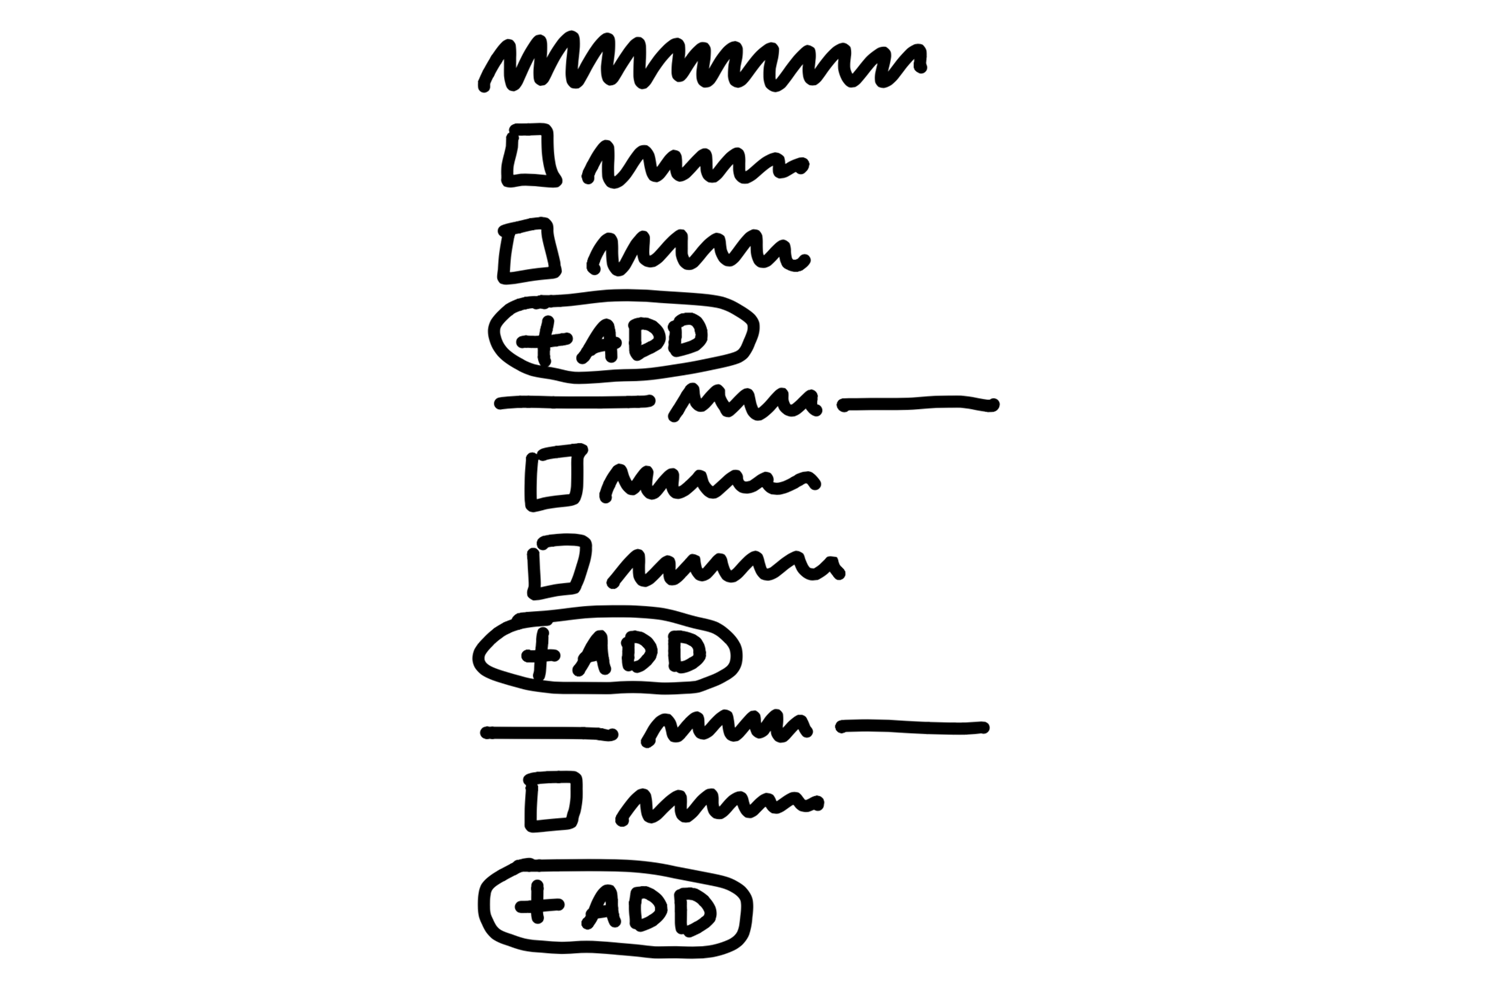 A sketch showing an Add button below each set of items: the loose items and the items in each group.